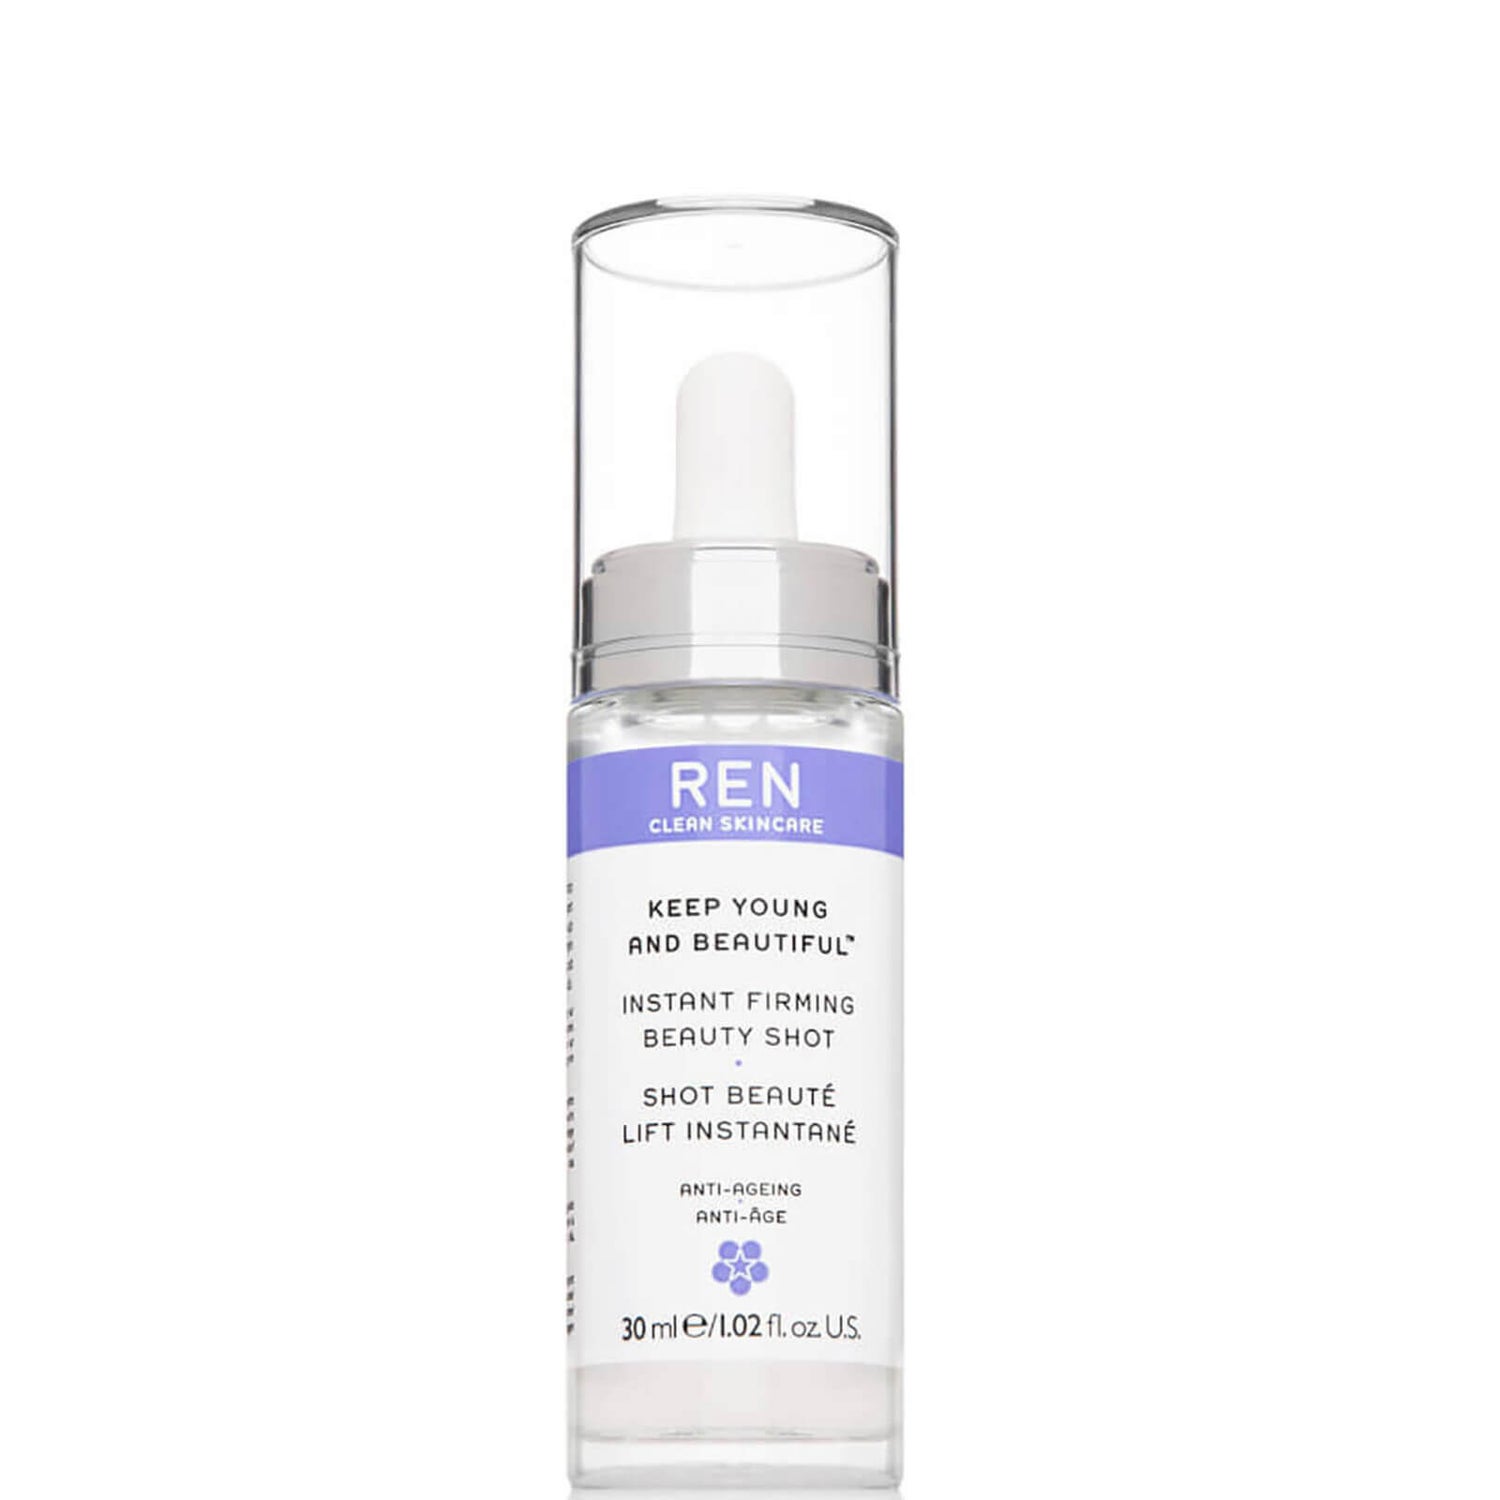 REN Clean Skincare Keep Young And Beautiful Instant Firming Beauty Shot (1.02 fl. oz.)